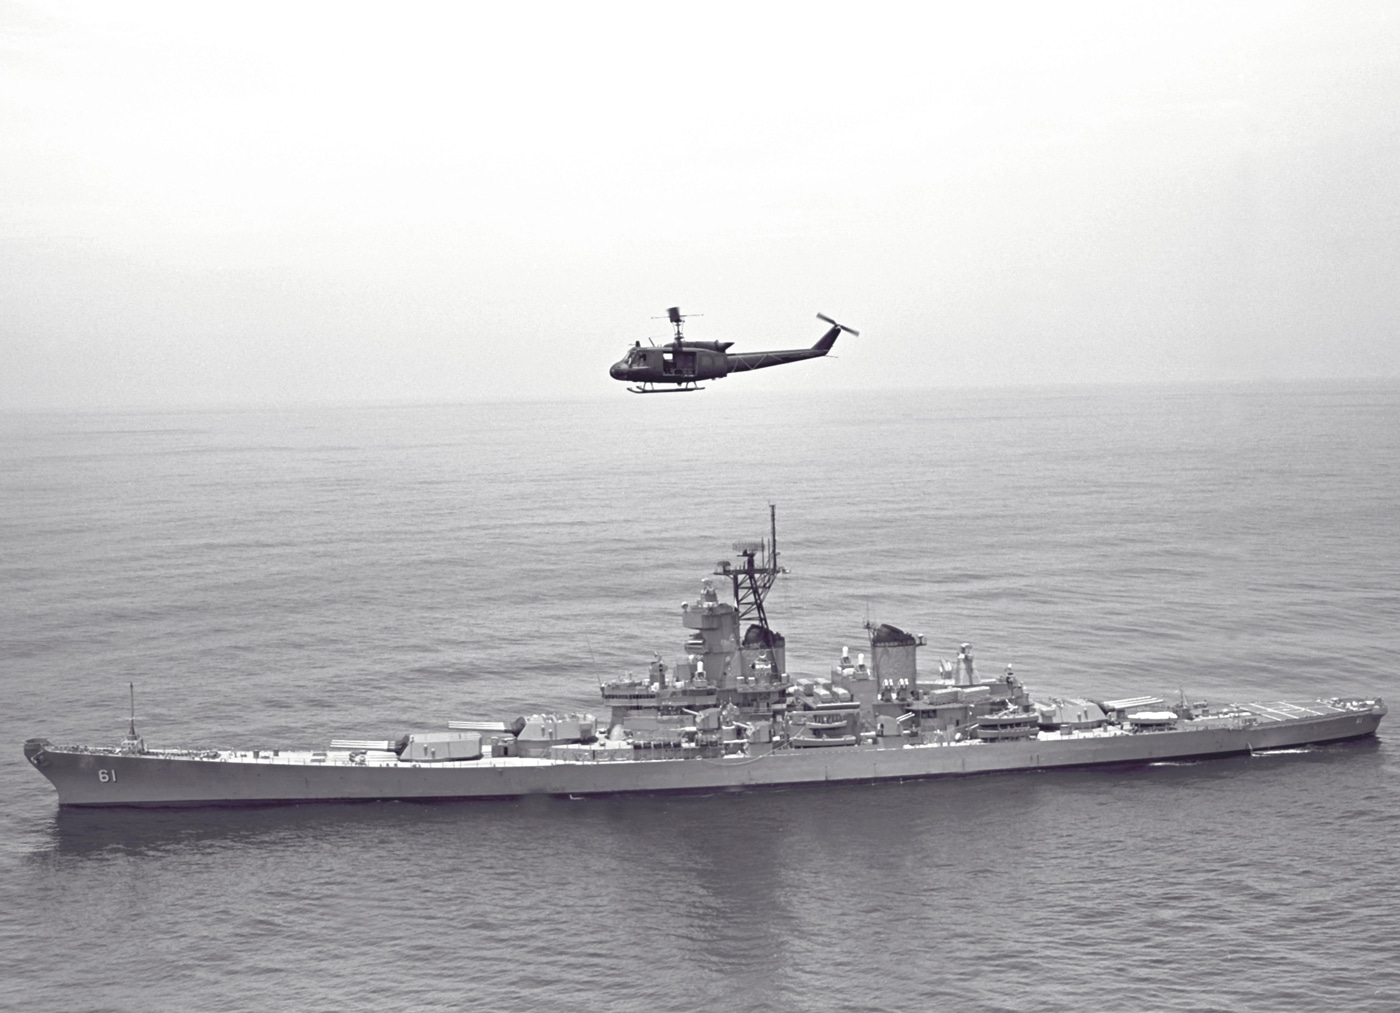 In this digital image, we see a UH-1 Iroquois helicopter as it flies over the battleship USS Iowa (BB-61) during its shakedown cruise in 1984. The Iowa had been modernized and returned to service to counter the Soviet Union during the President Ronald Reagan Administration.